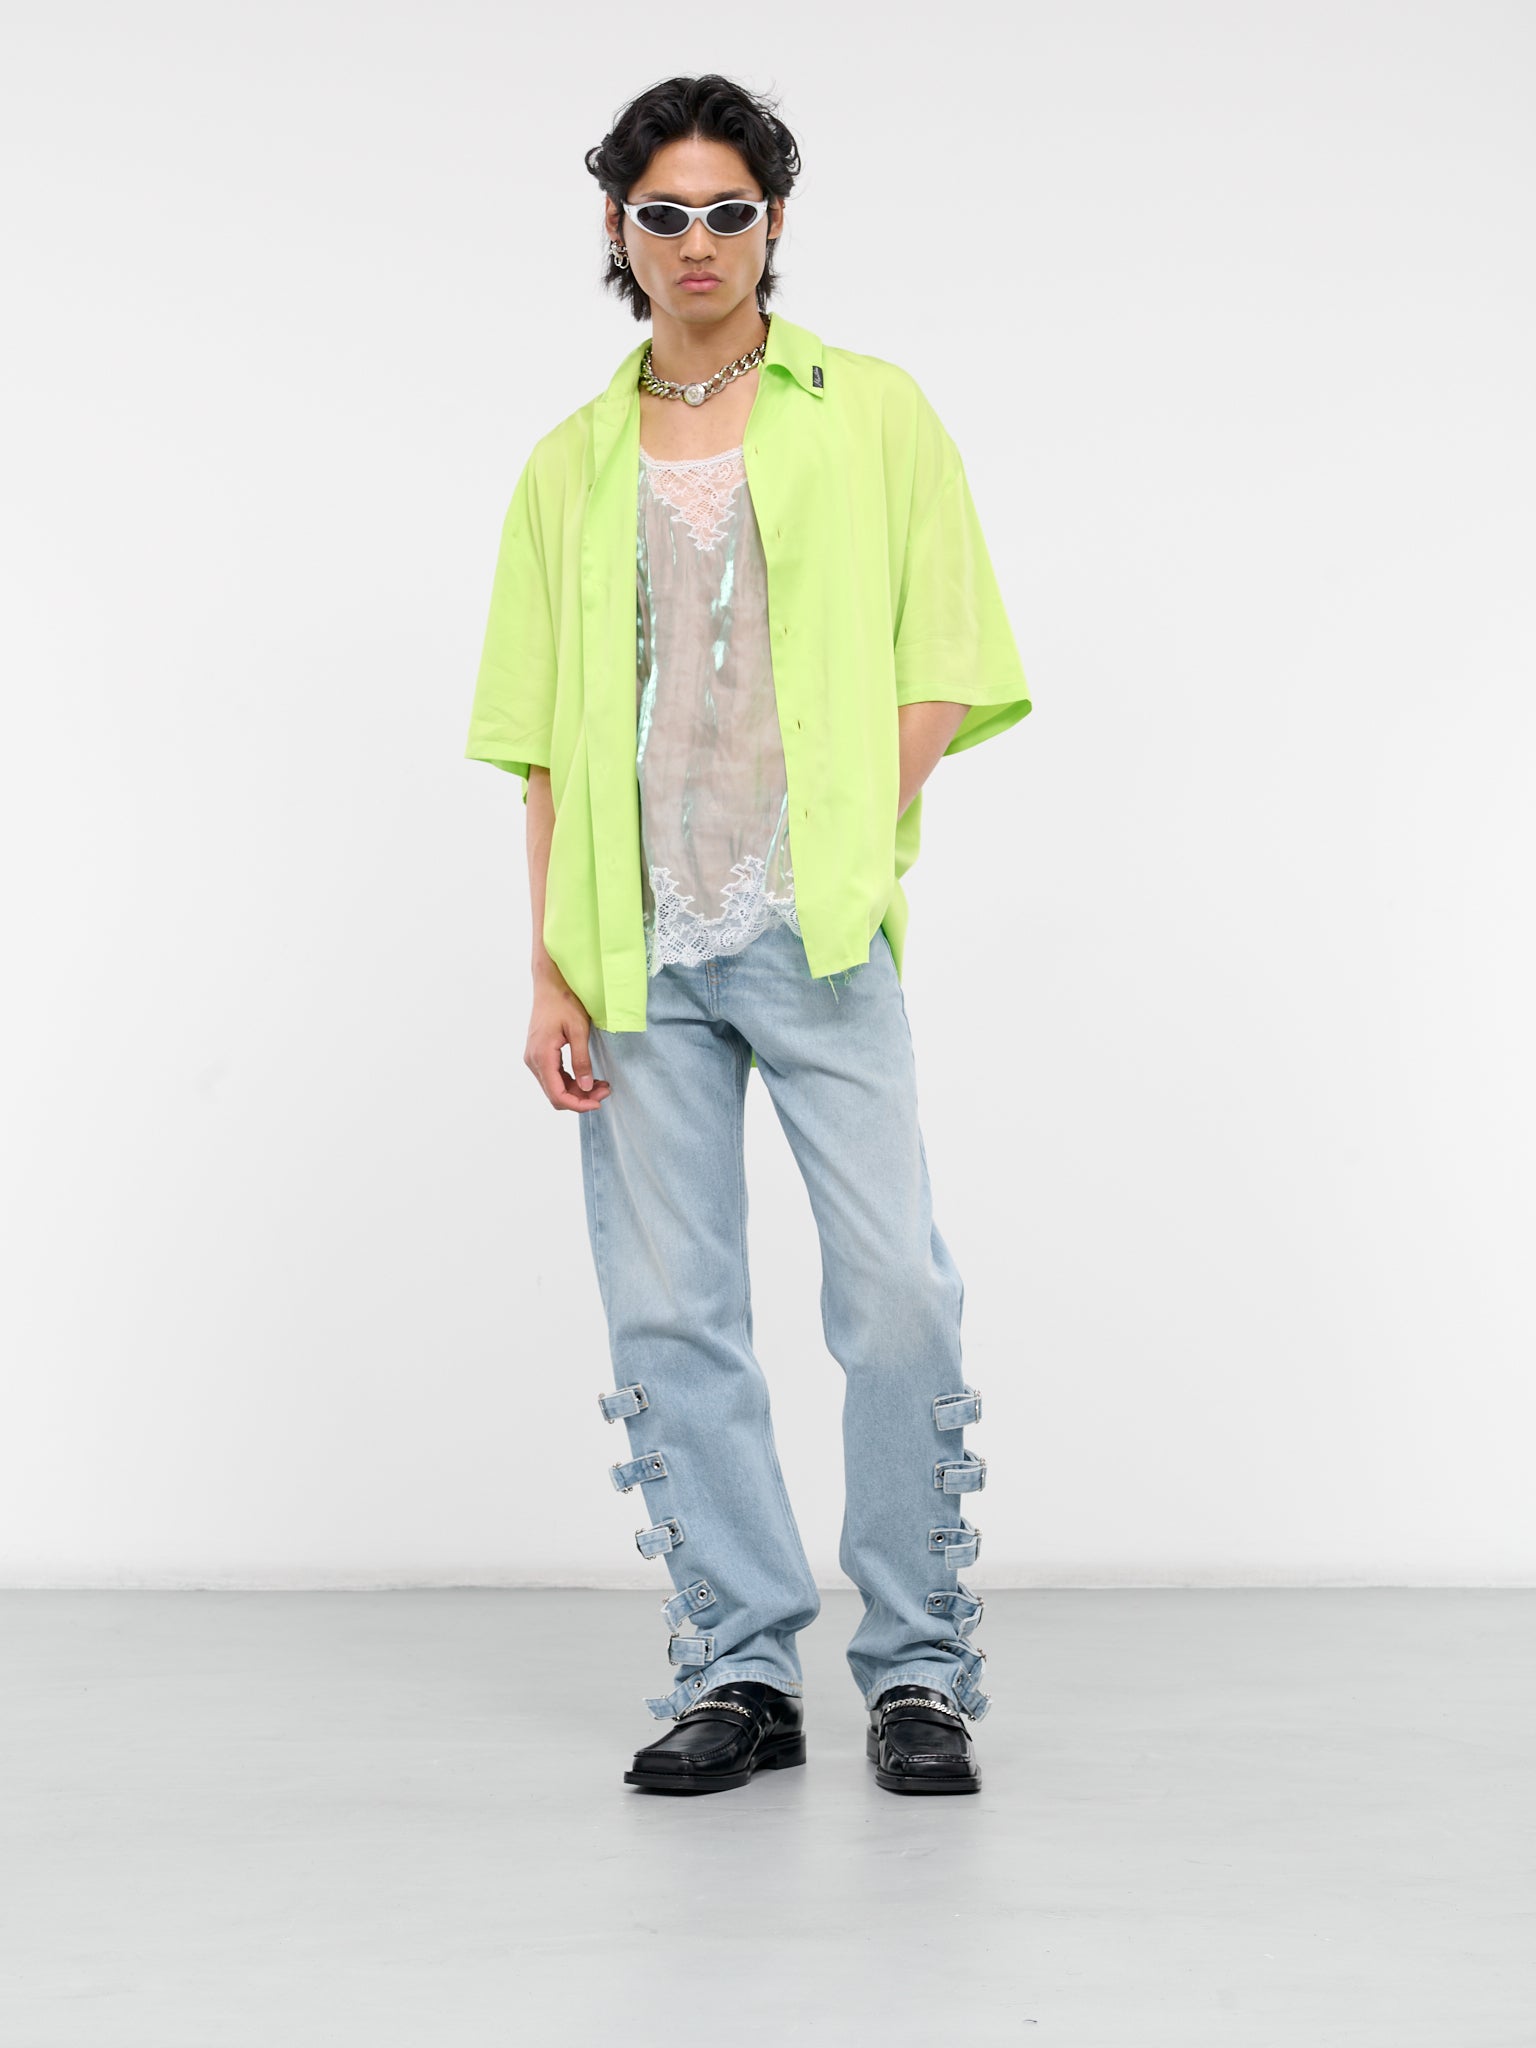 Camisole Shirt (426-LIMIRR-LIME-IRRIDESCENT)